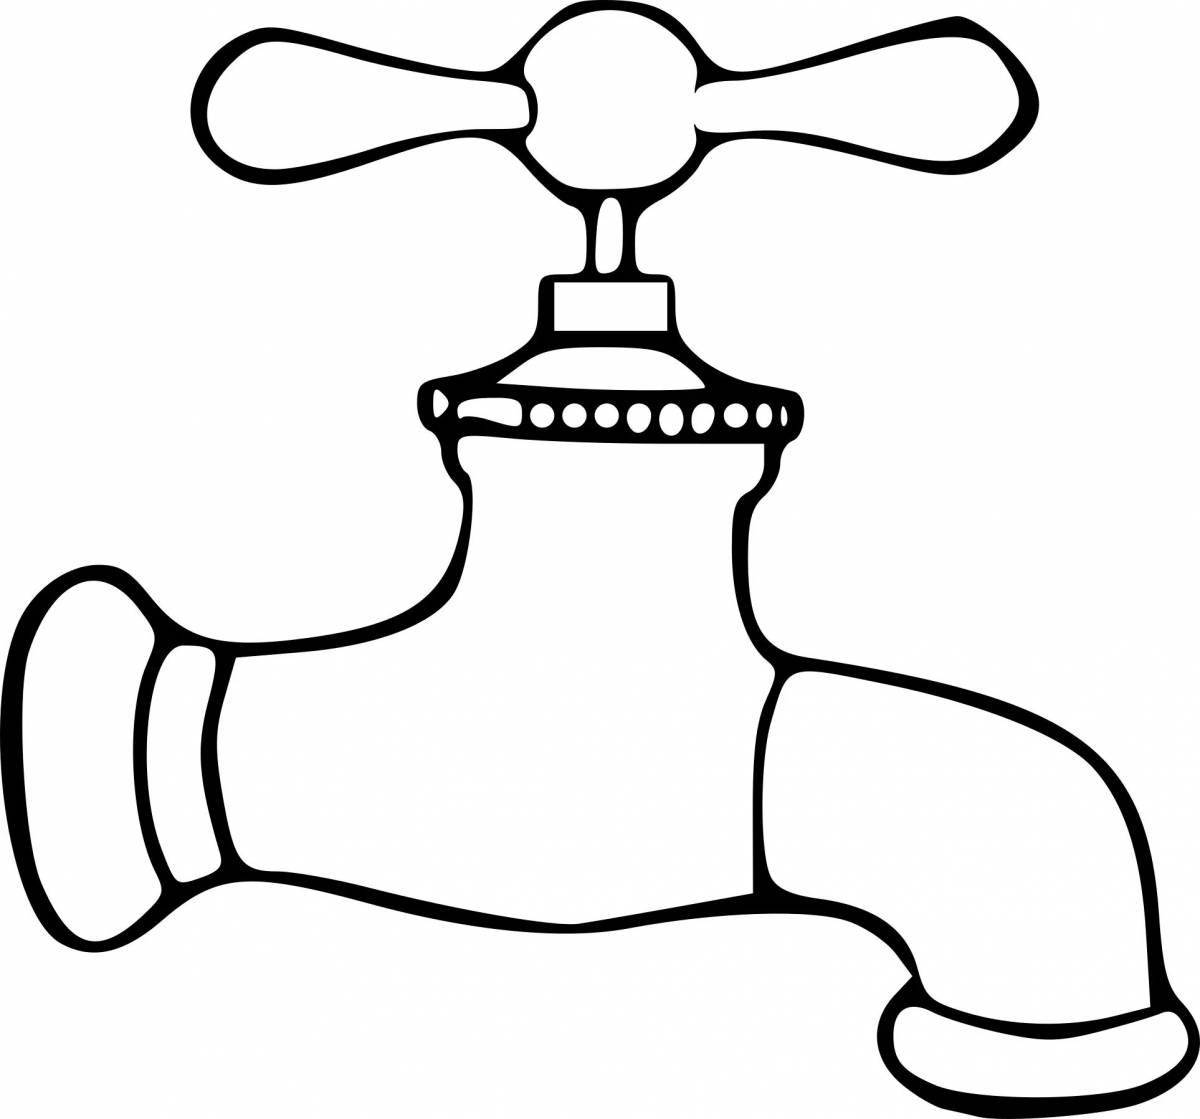 Colorful water faucet coloring page for kids